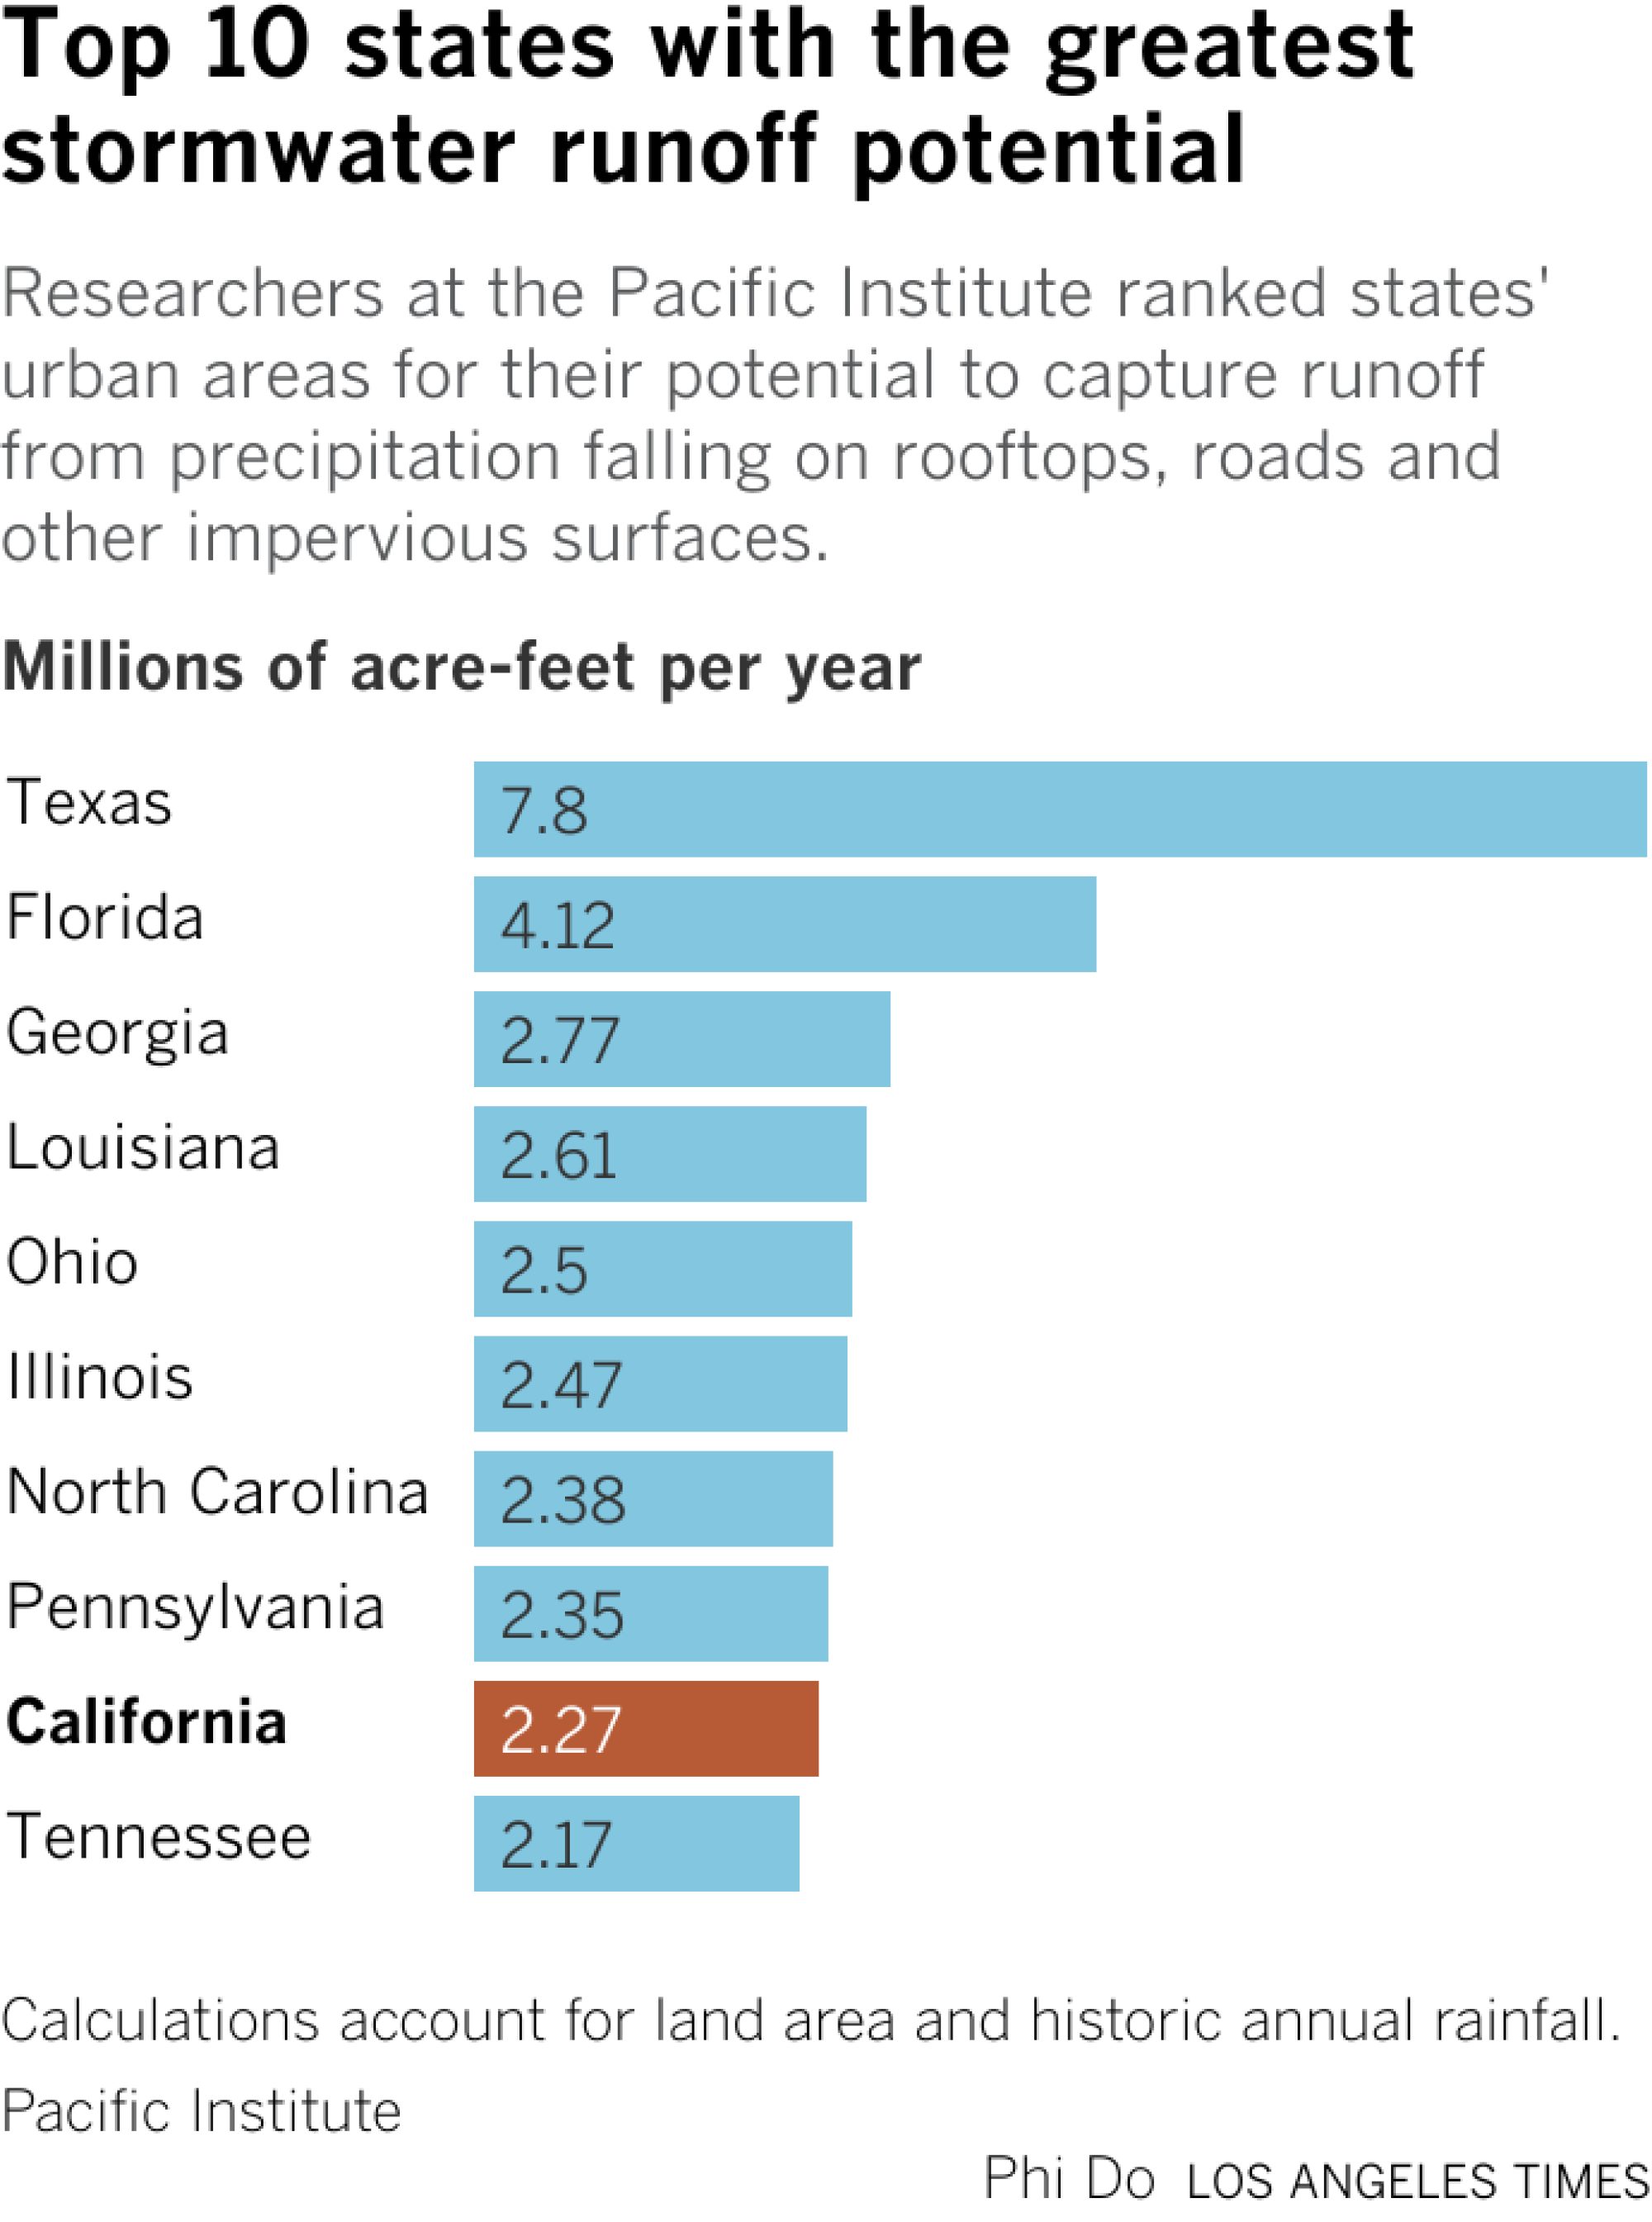 Bar chart showing states with highest stormwater runoff potential